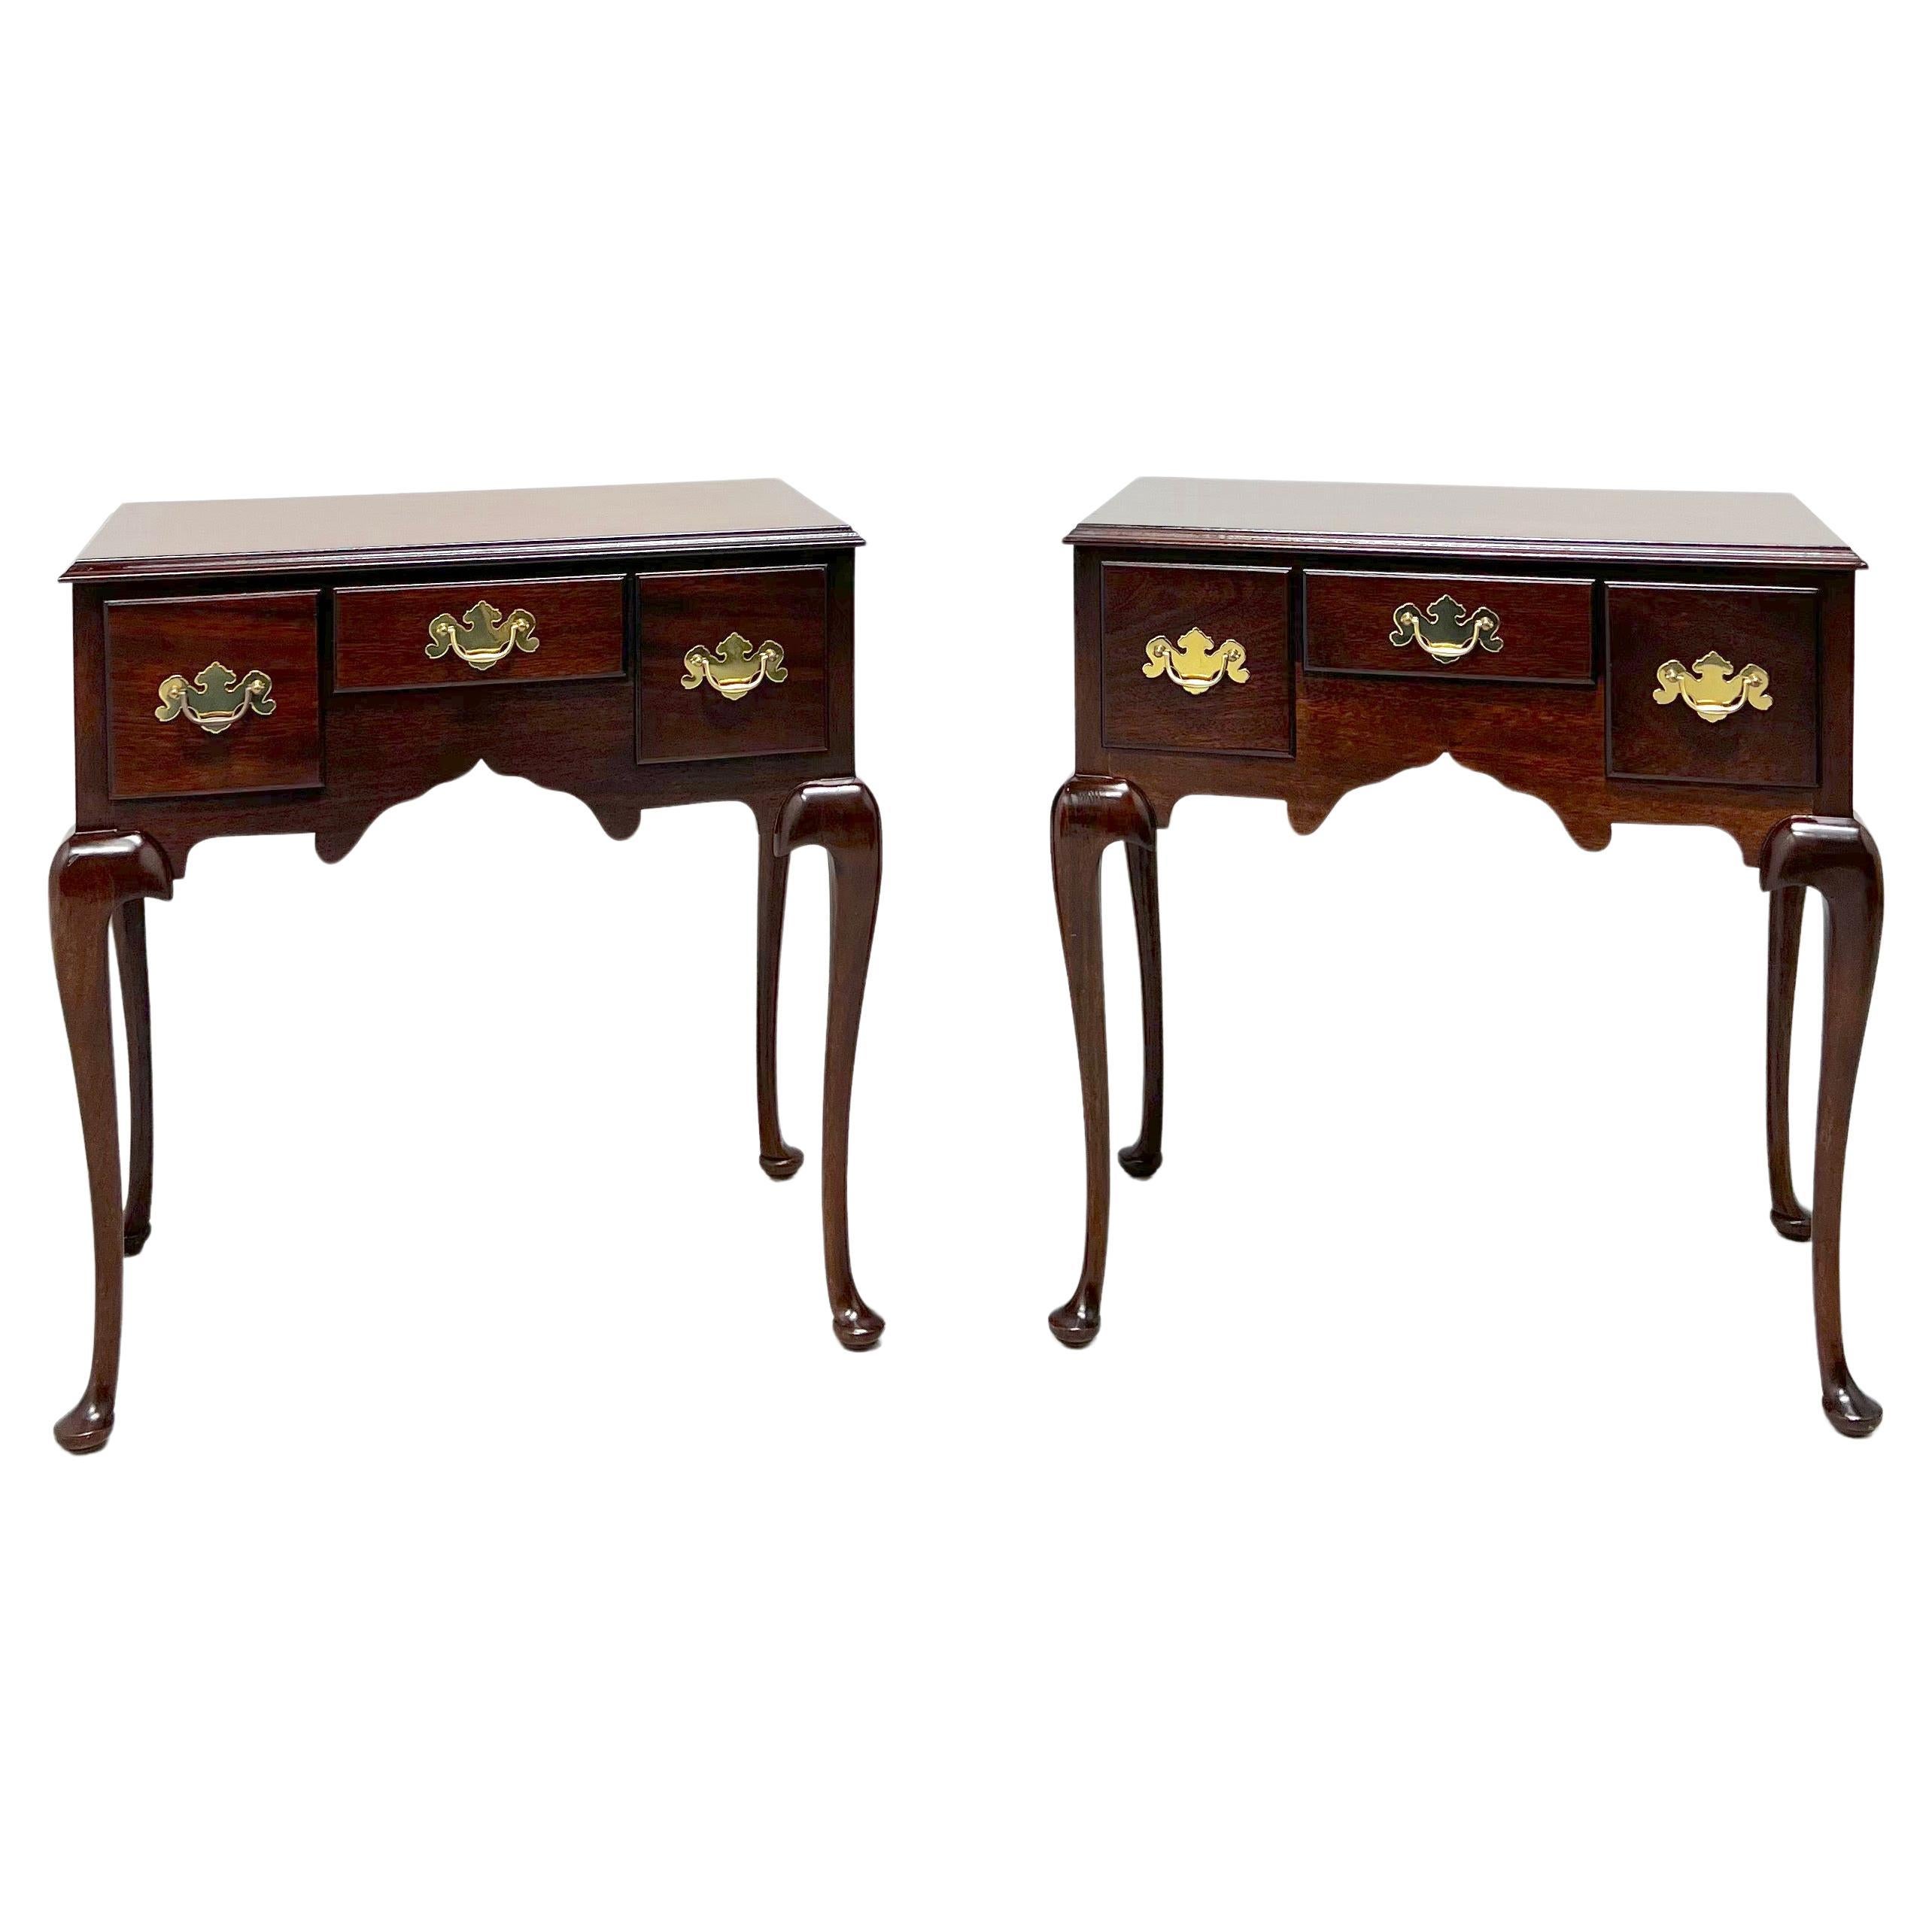 MADISON SQUARE Mahogany Queen Anne Lowboy Style Bedside / Side Tables - Pair